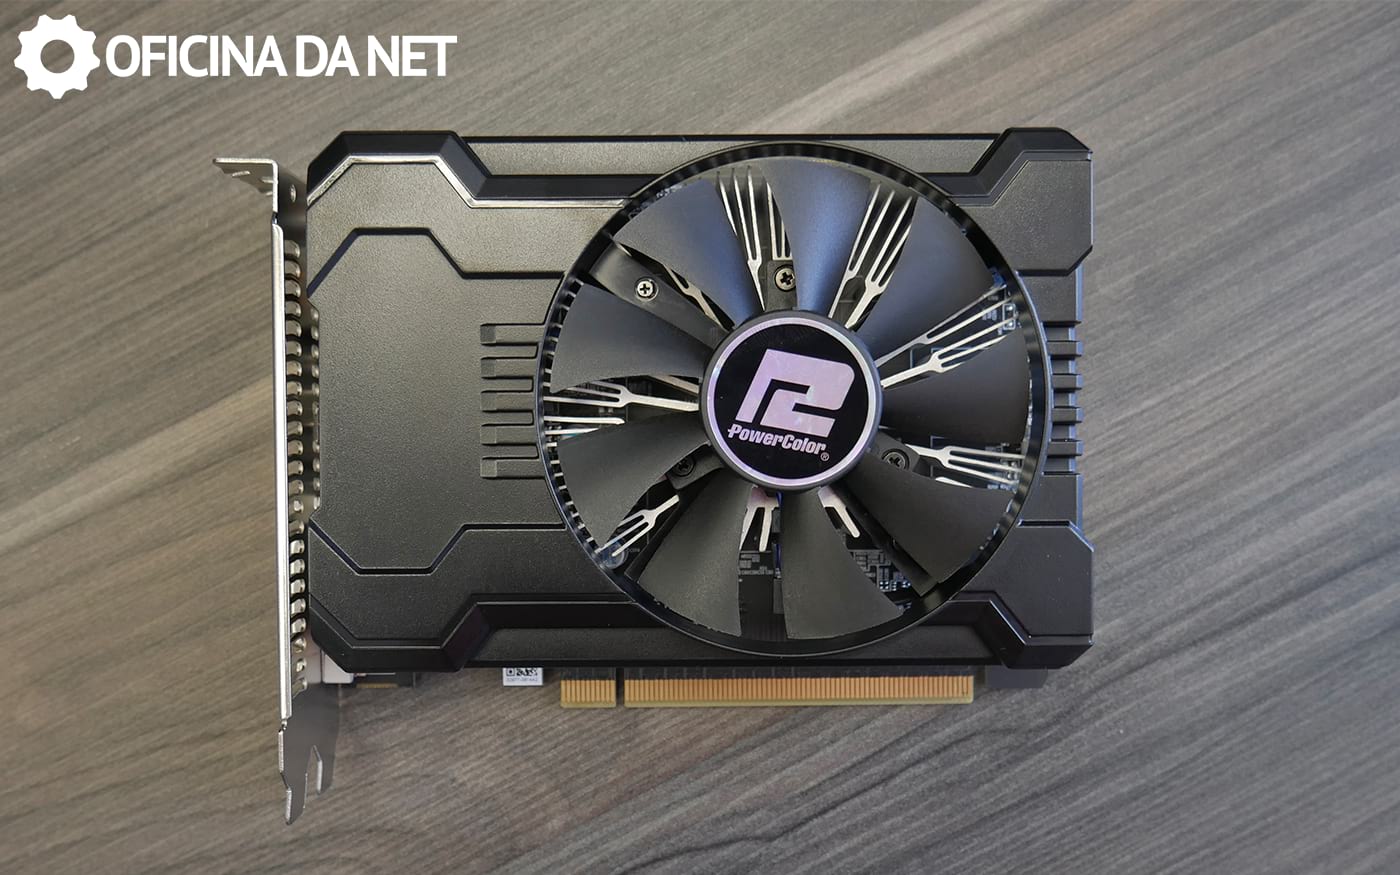 Is it worth buying a $ 350 video card in 2020?